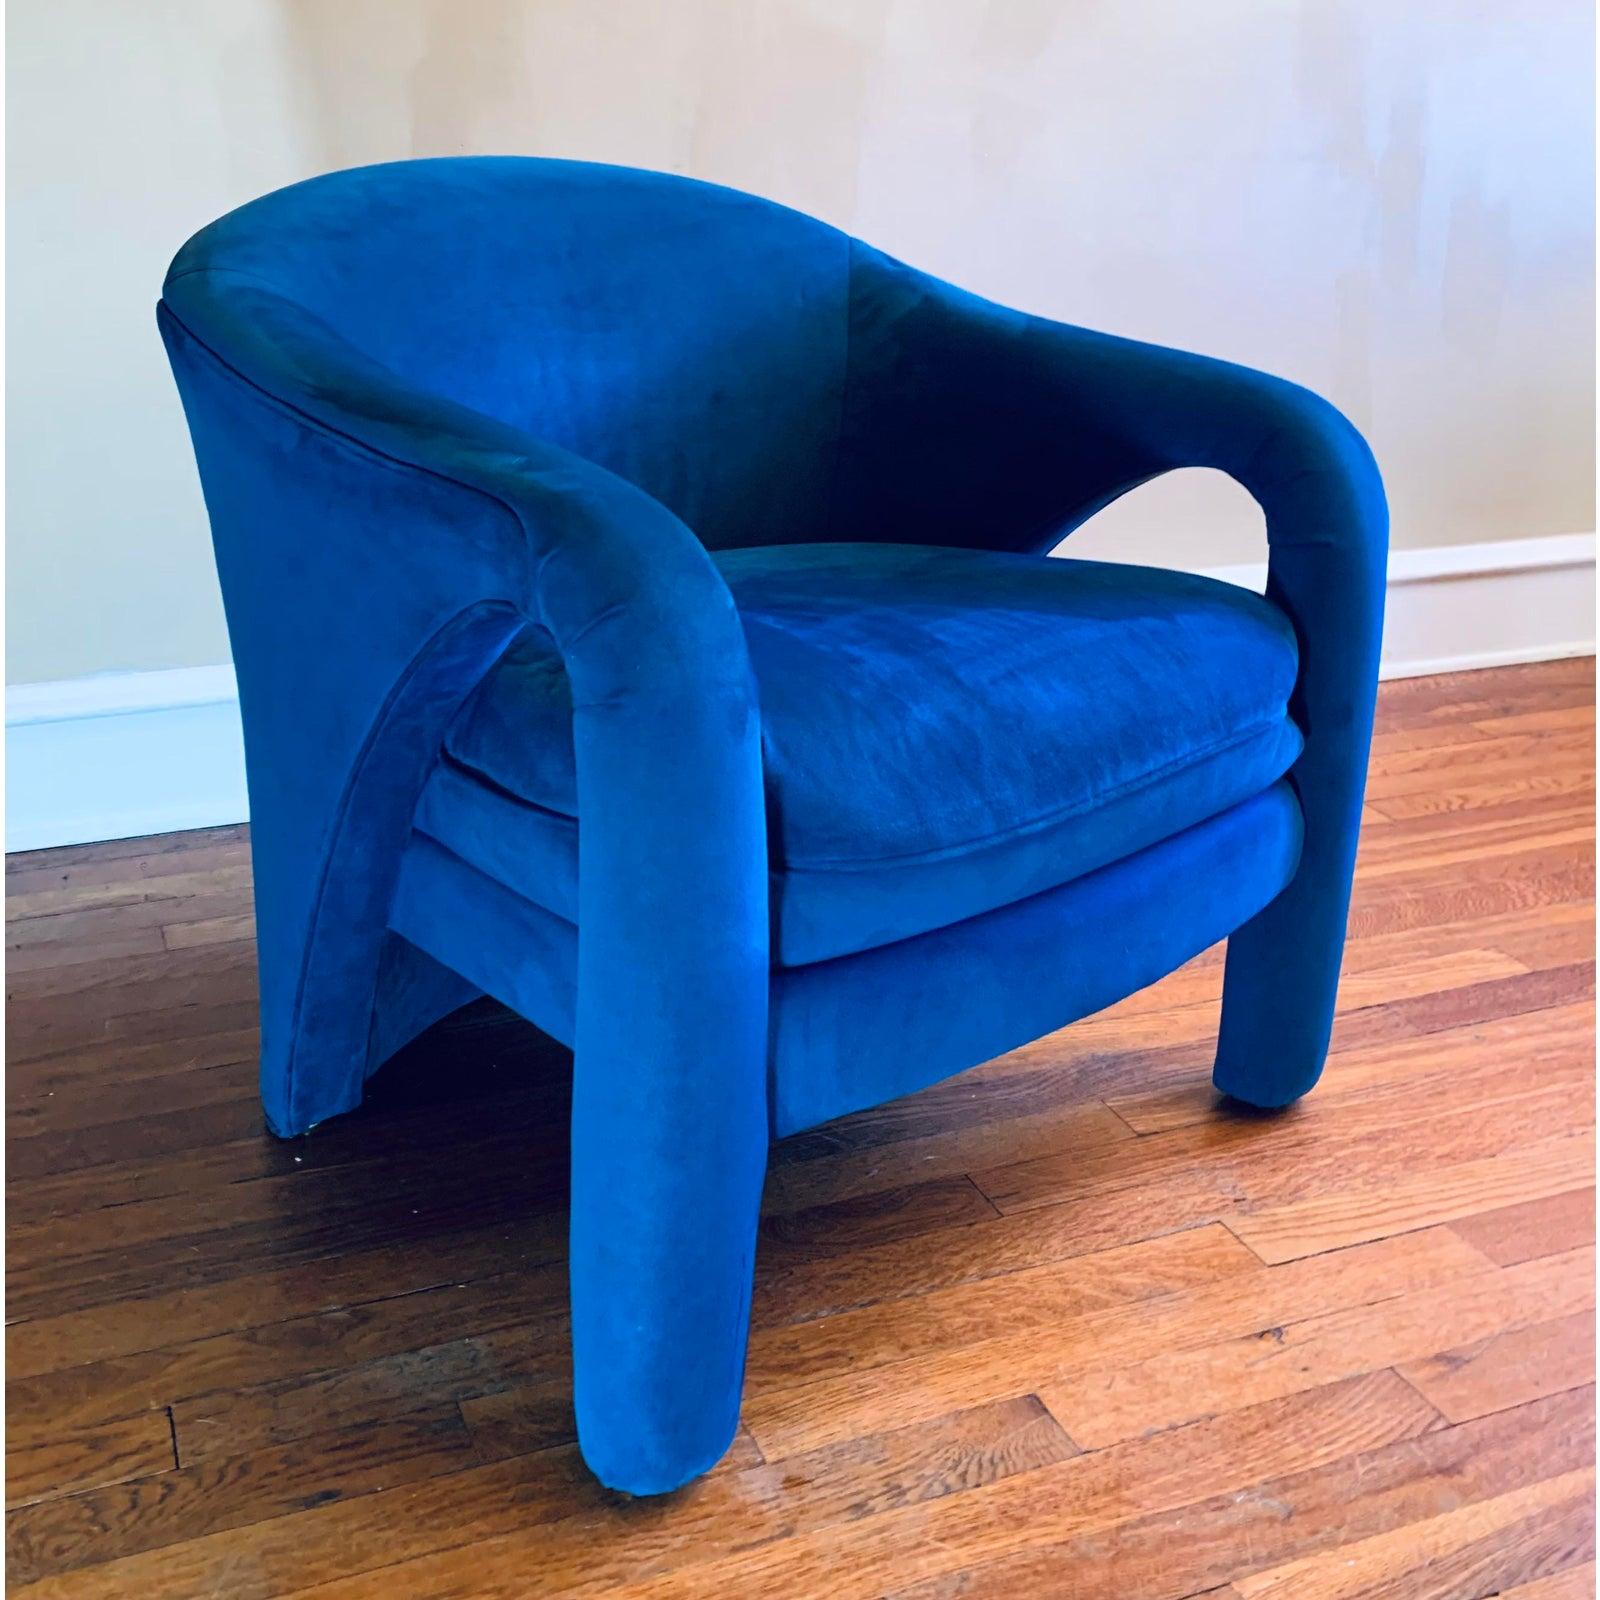 Hand-Crafted Modern Blue Club Chair in the Style of Vladimir Kagan